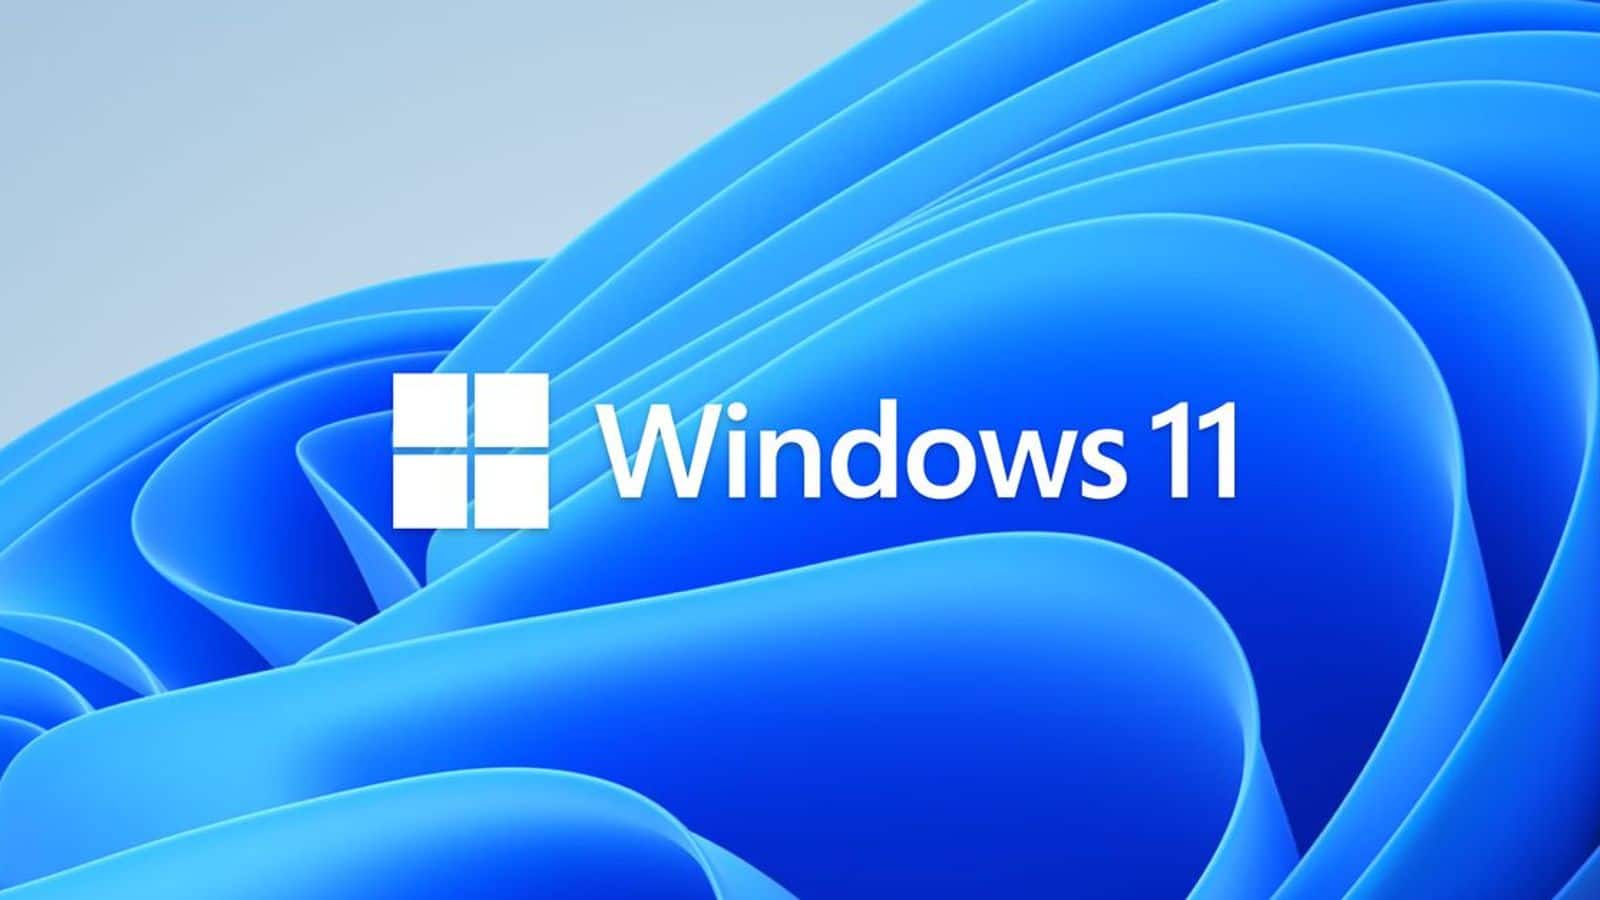 Microsoft announces early access to next Windows 11 update